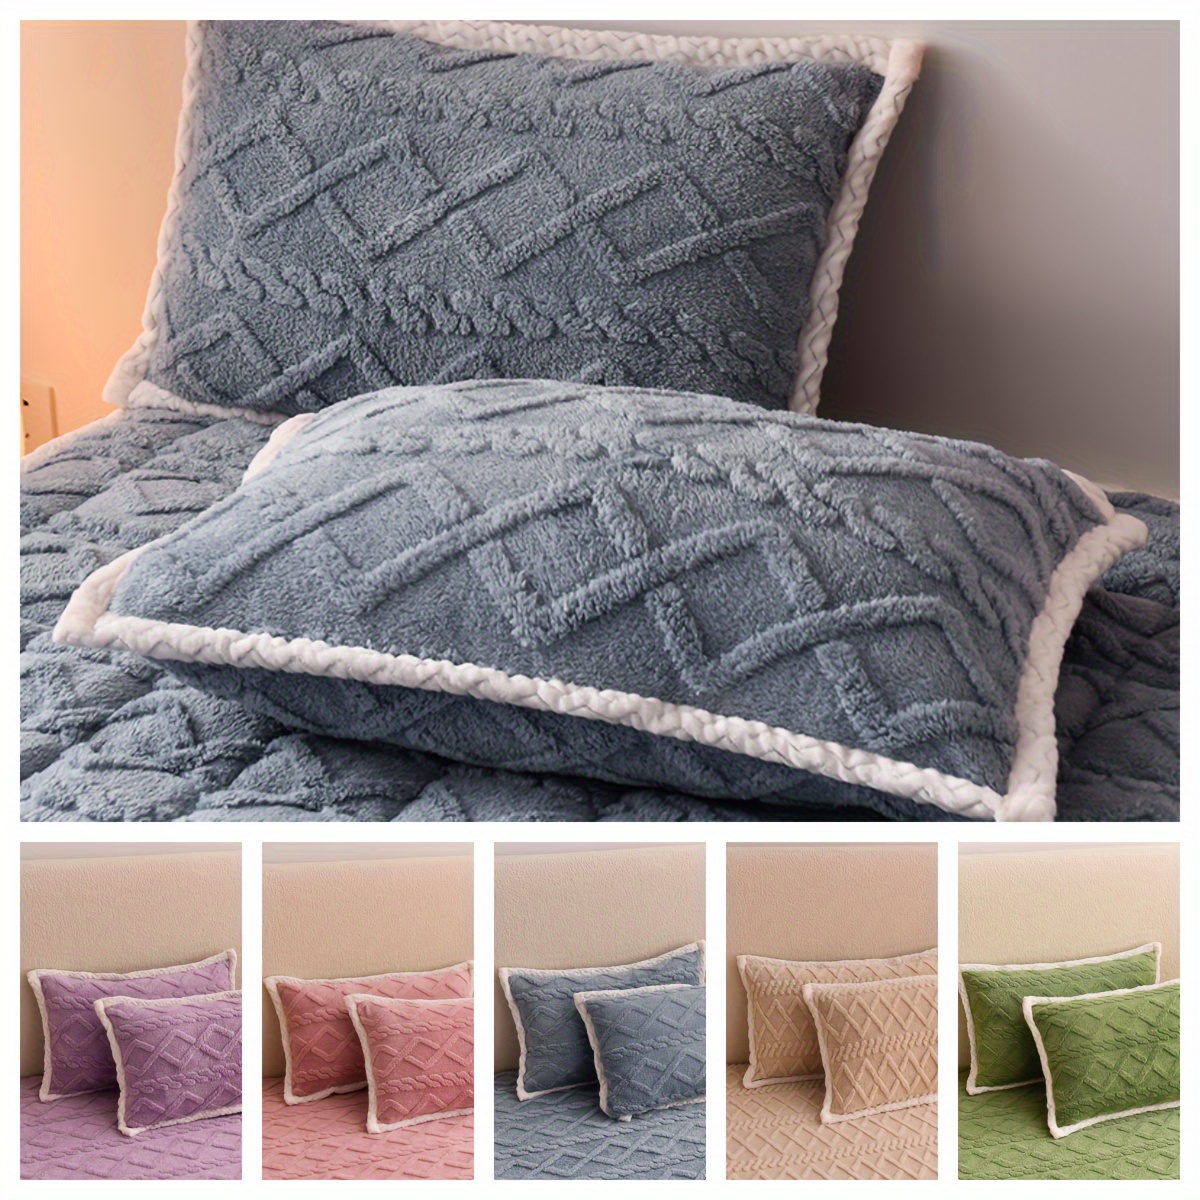 

2pcs Microfiber Knitted Checkered Pillowcases, Reversible Zipper Closure, Soft Breathable Cushion Covers, Machine Washable (pillow Core Not Included)